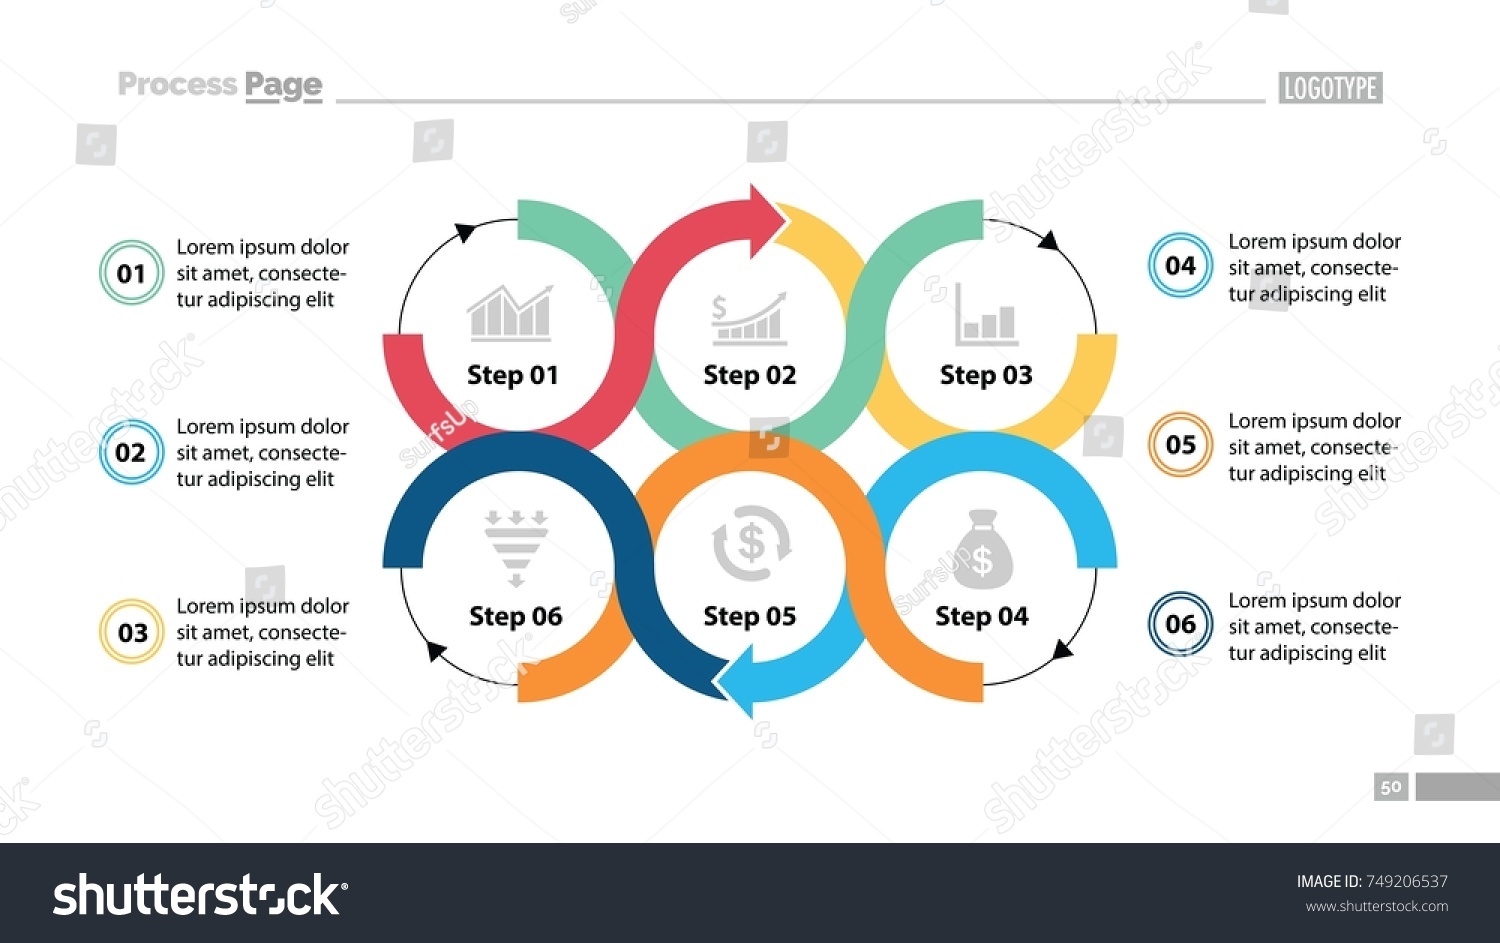 Six Steps Process Chart Design Royalty Free Stock Vector 749206537 8555